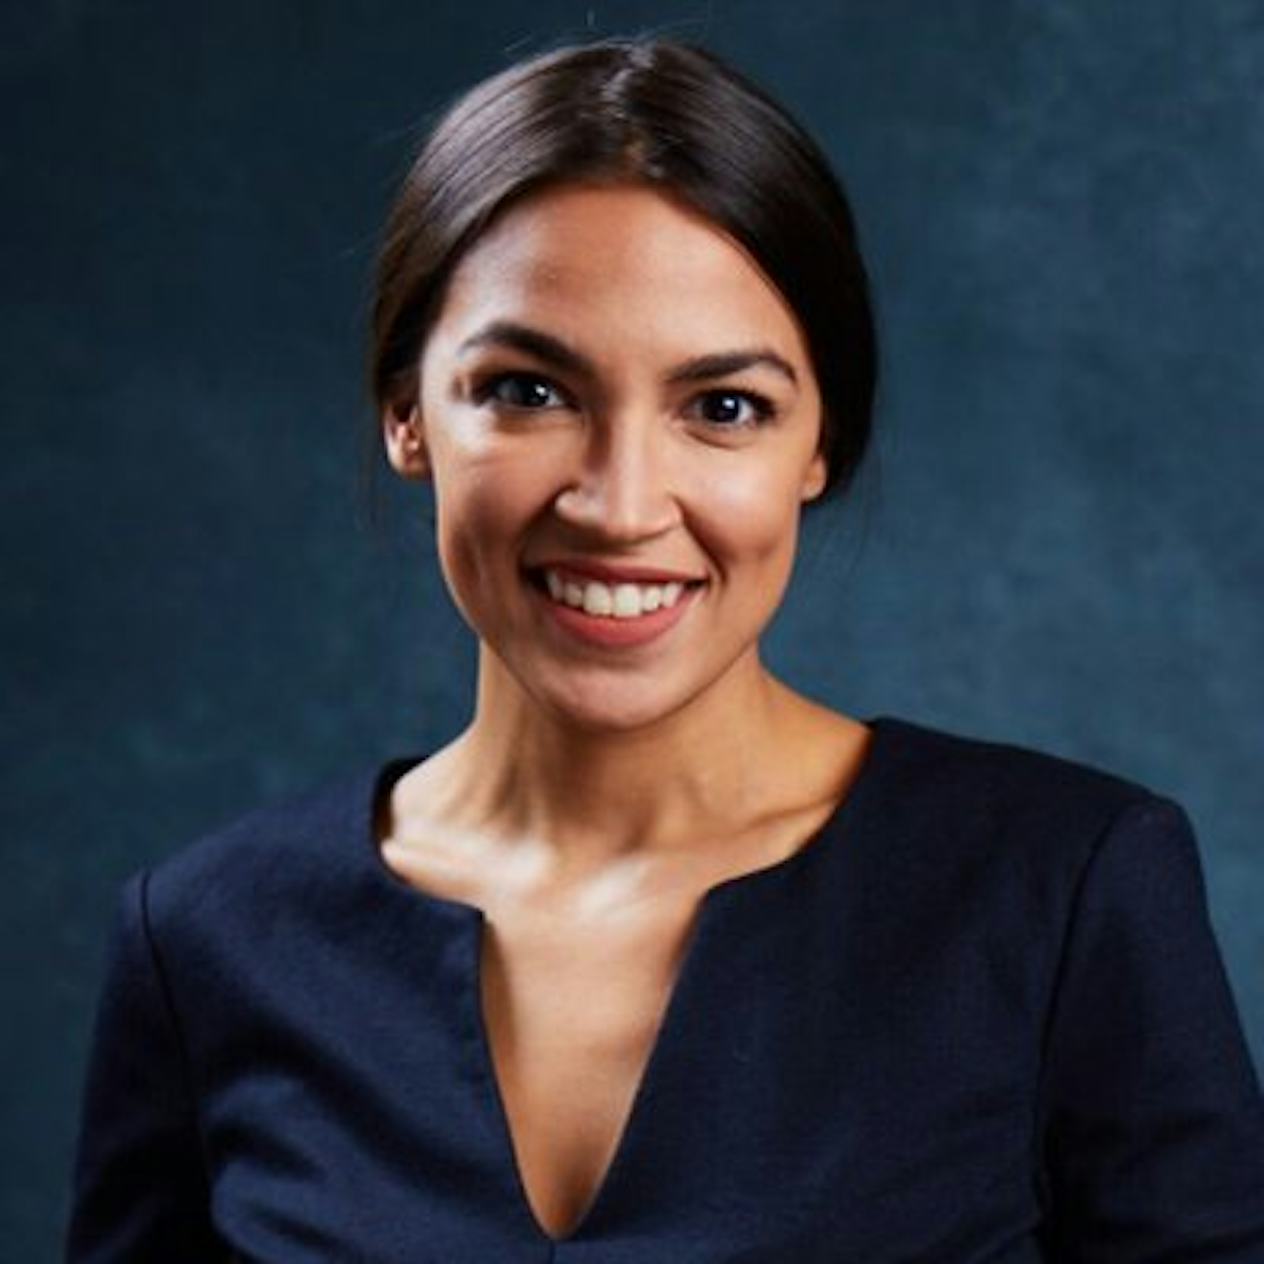 11 Facts About Alexandria Ocasio Cortez That Show The True Power Of Her 